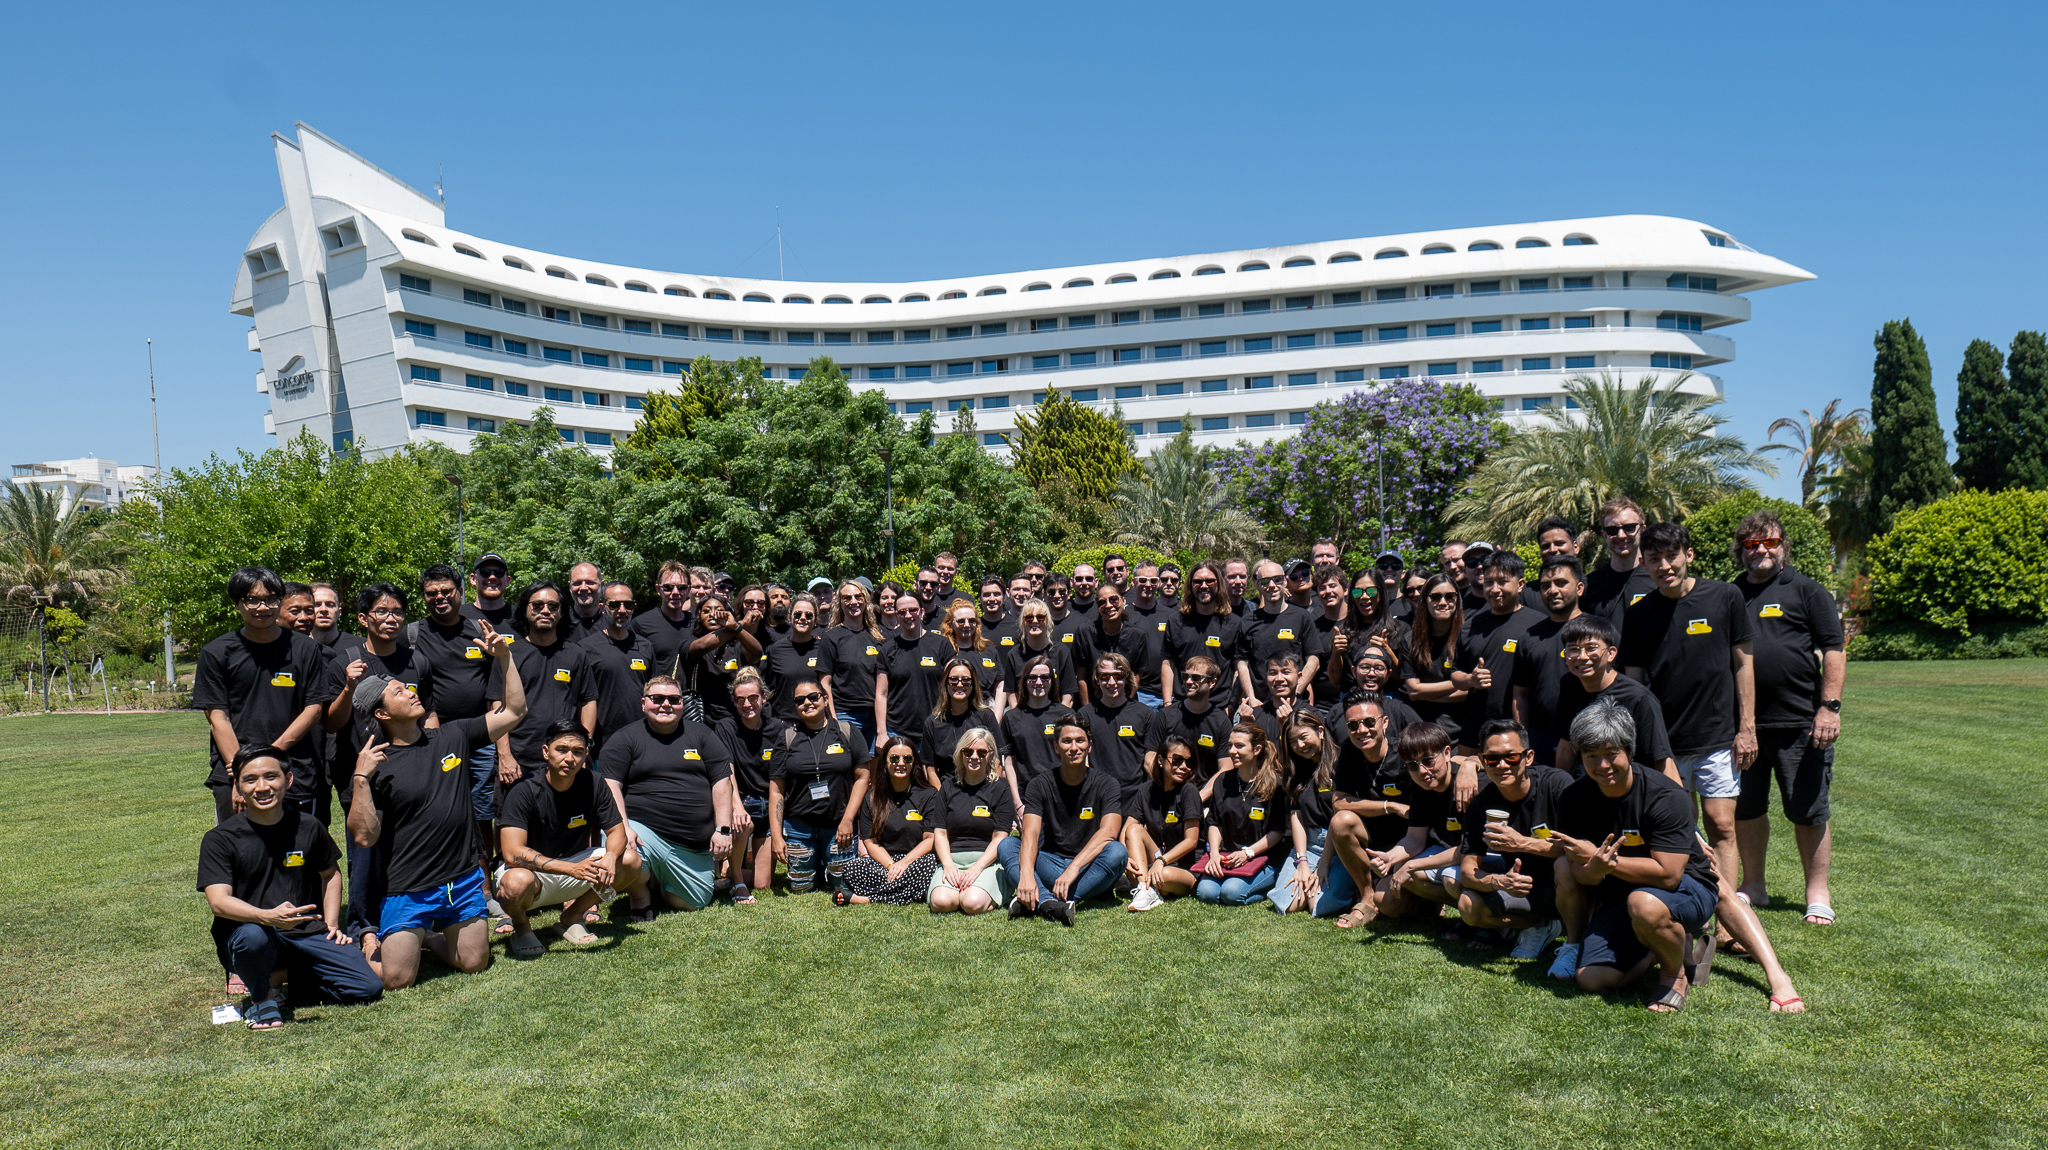 The Screencloud team at the company's headquarters